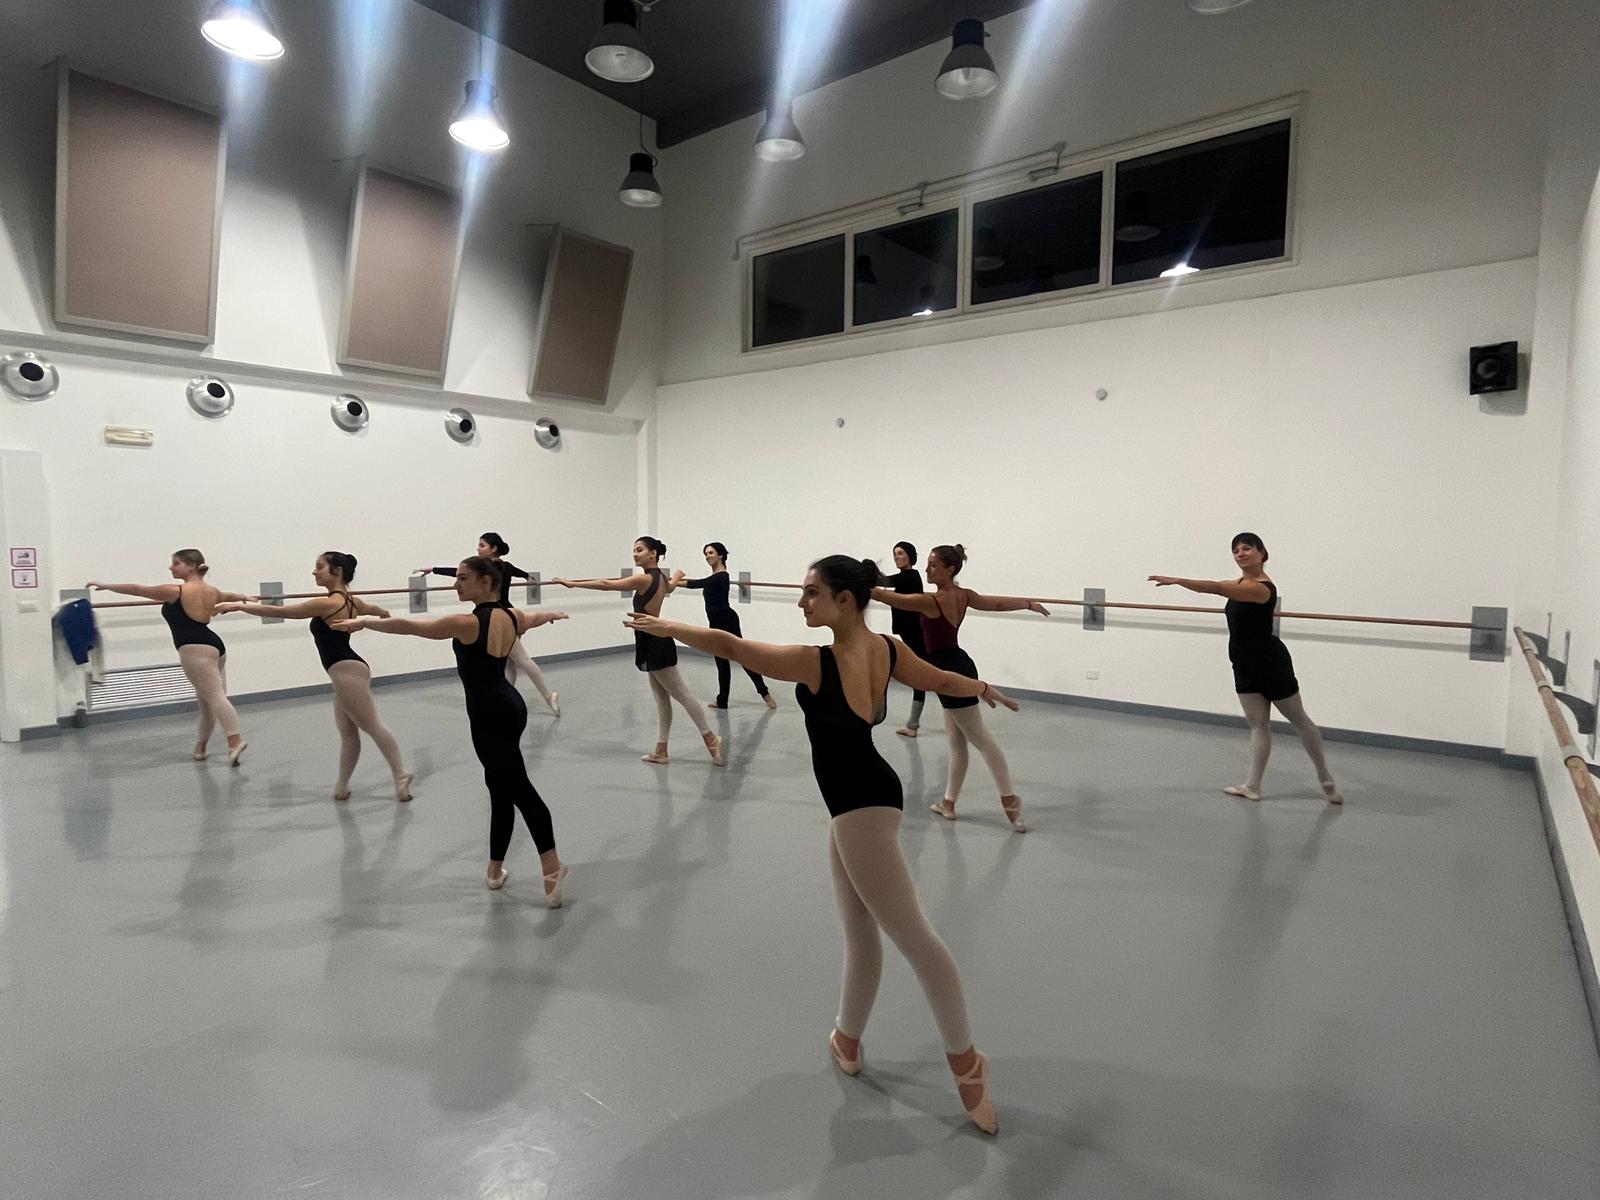 Training for dancers: the Viagrande Studios course that combines different age groups and preparation levels